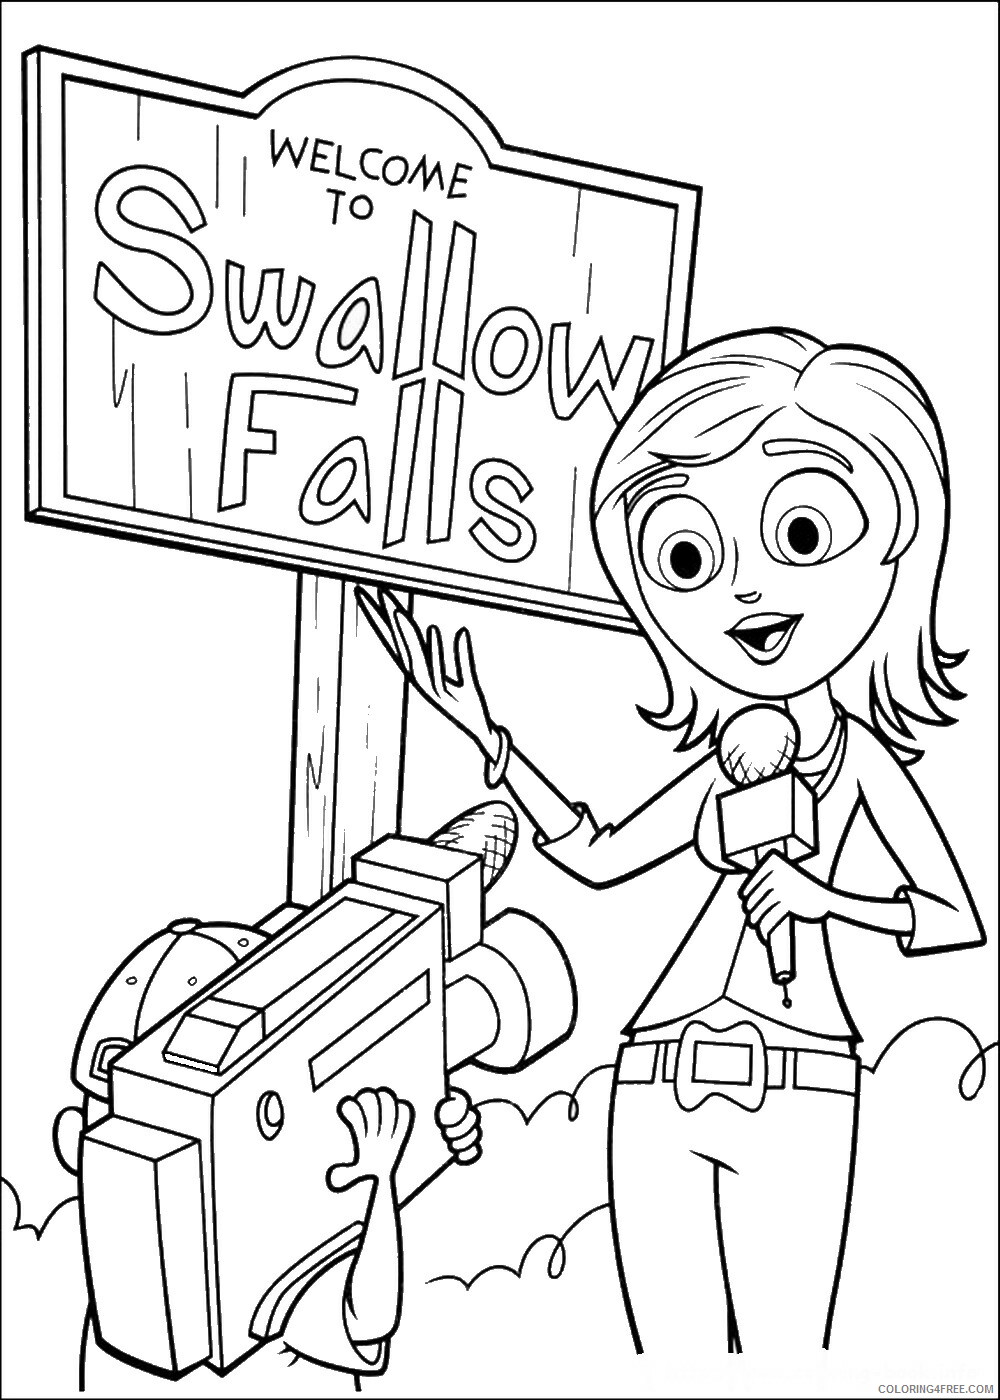 Cloudy with a Chance of Meatballs Coloring Pages TV Film Printable 2020 02211 Coloring4free